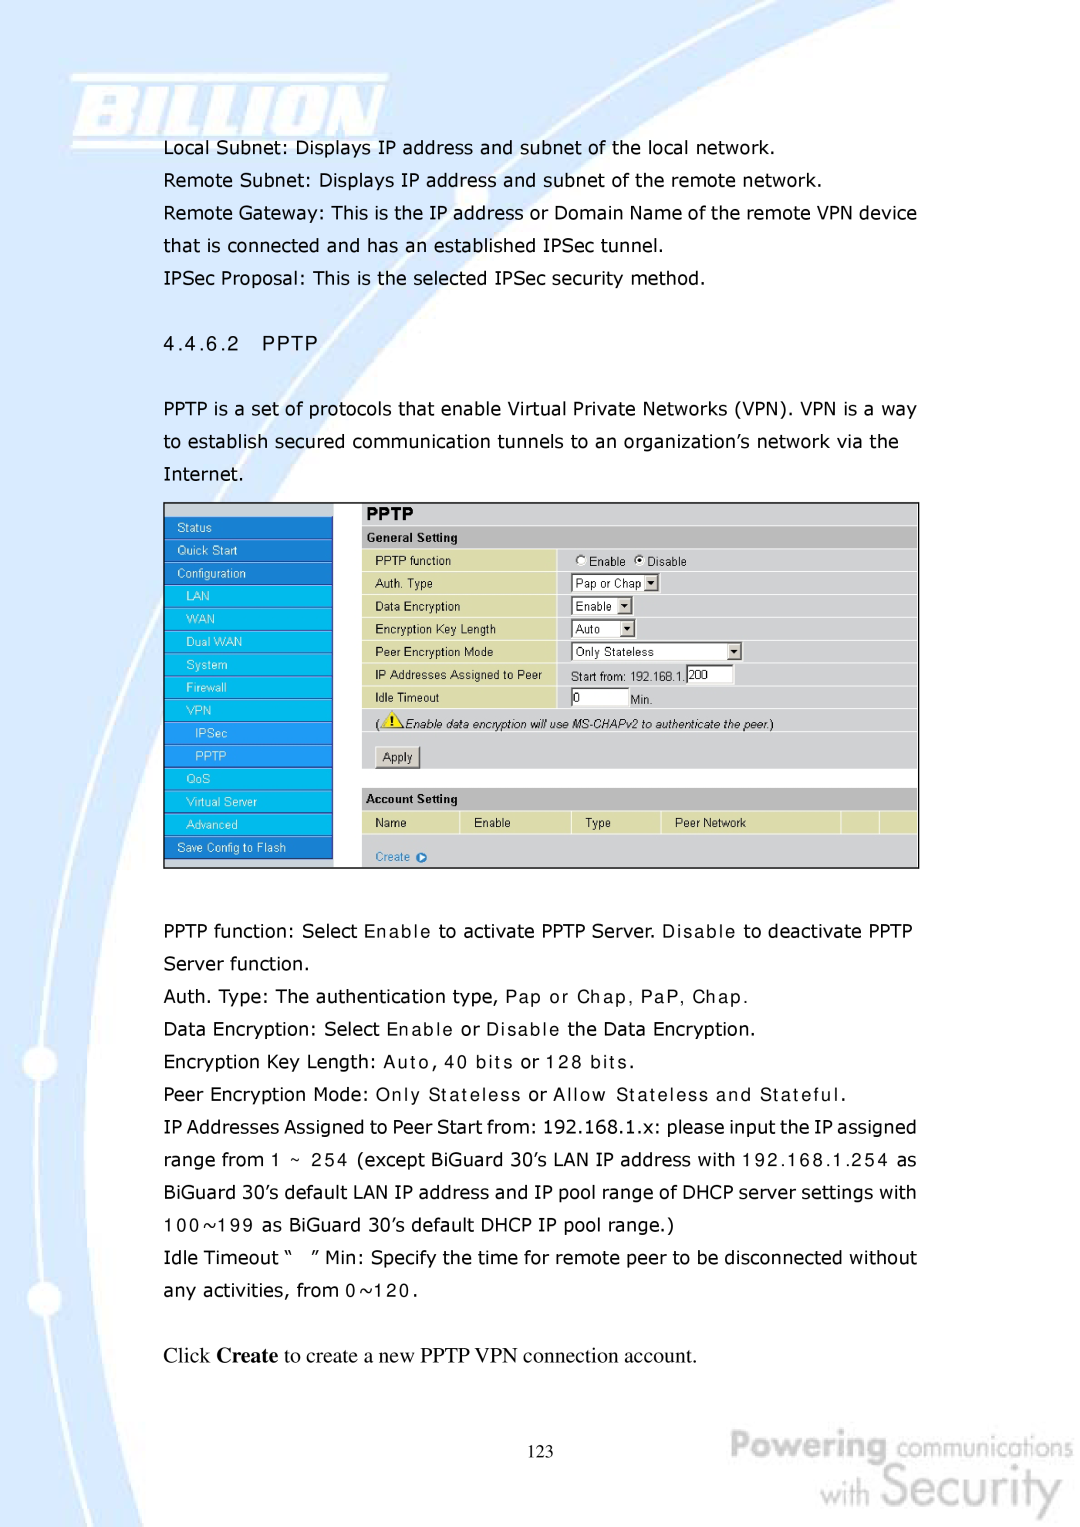 Billion Electric Company 30 user manual Click Create to create a new PPTP VPN connection account, Pptp 